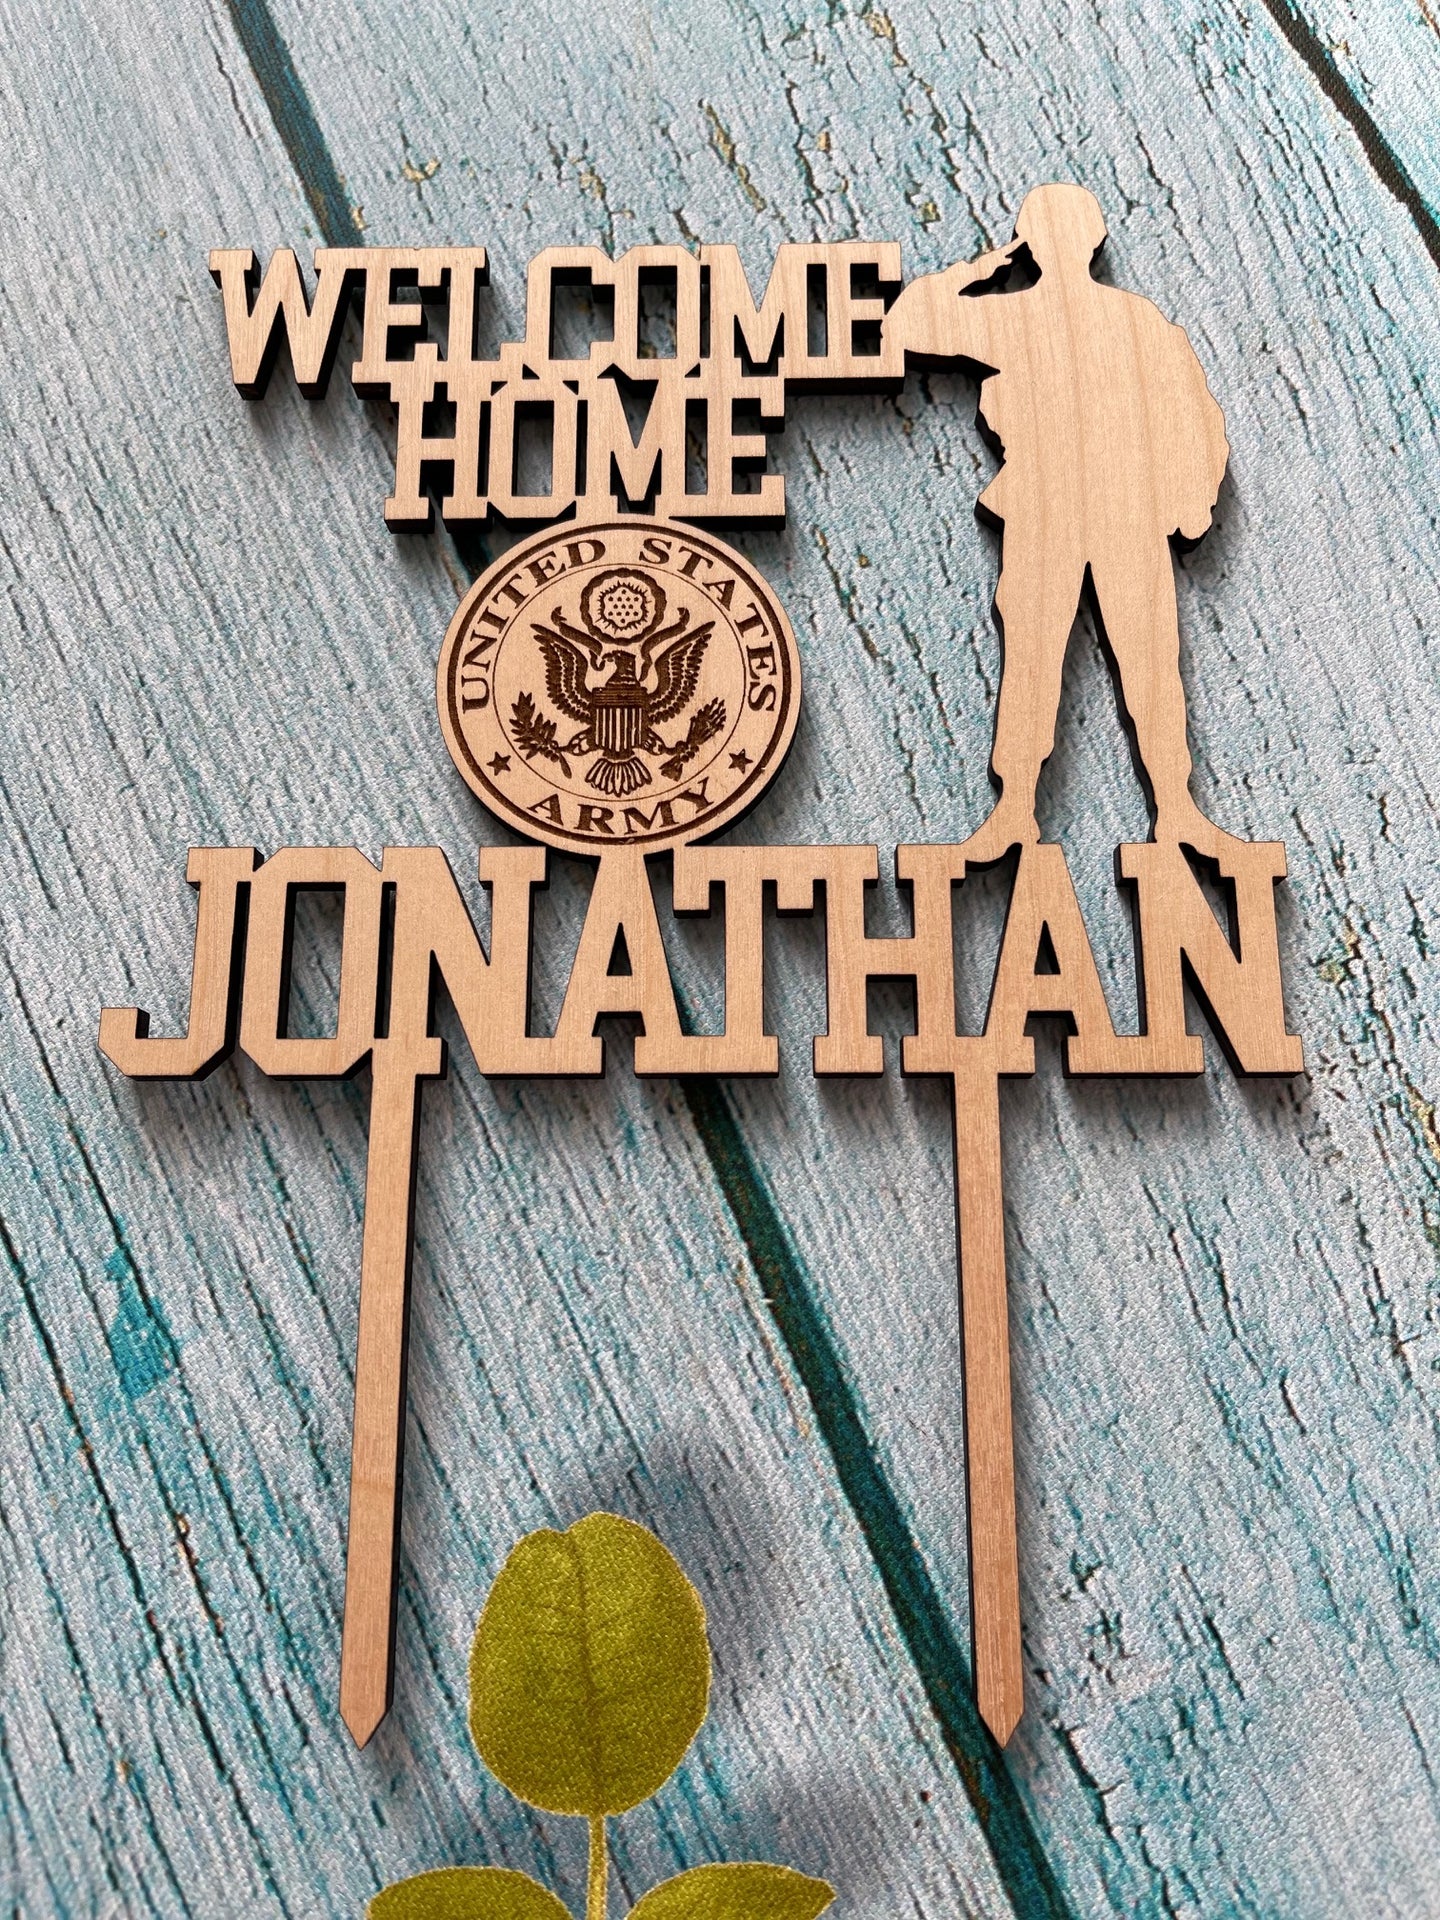 Soldier Cake Topper, Welcome Home Cake Topper, Happy Birthday Soldier Cake Topper, Troop Cake Topper, Military Topper, Military Birthday